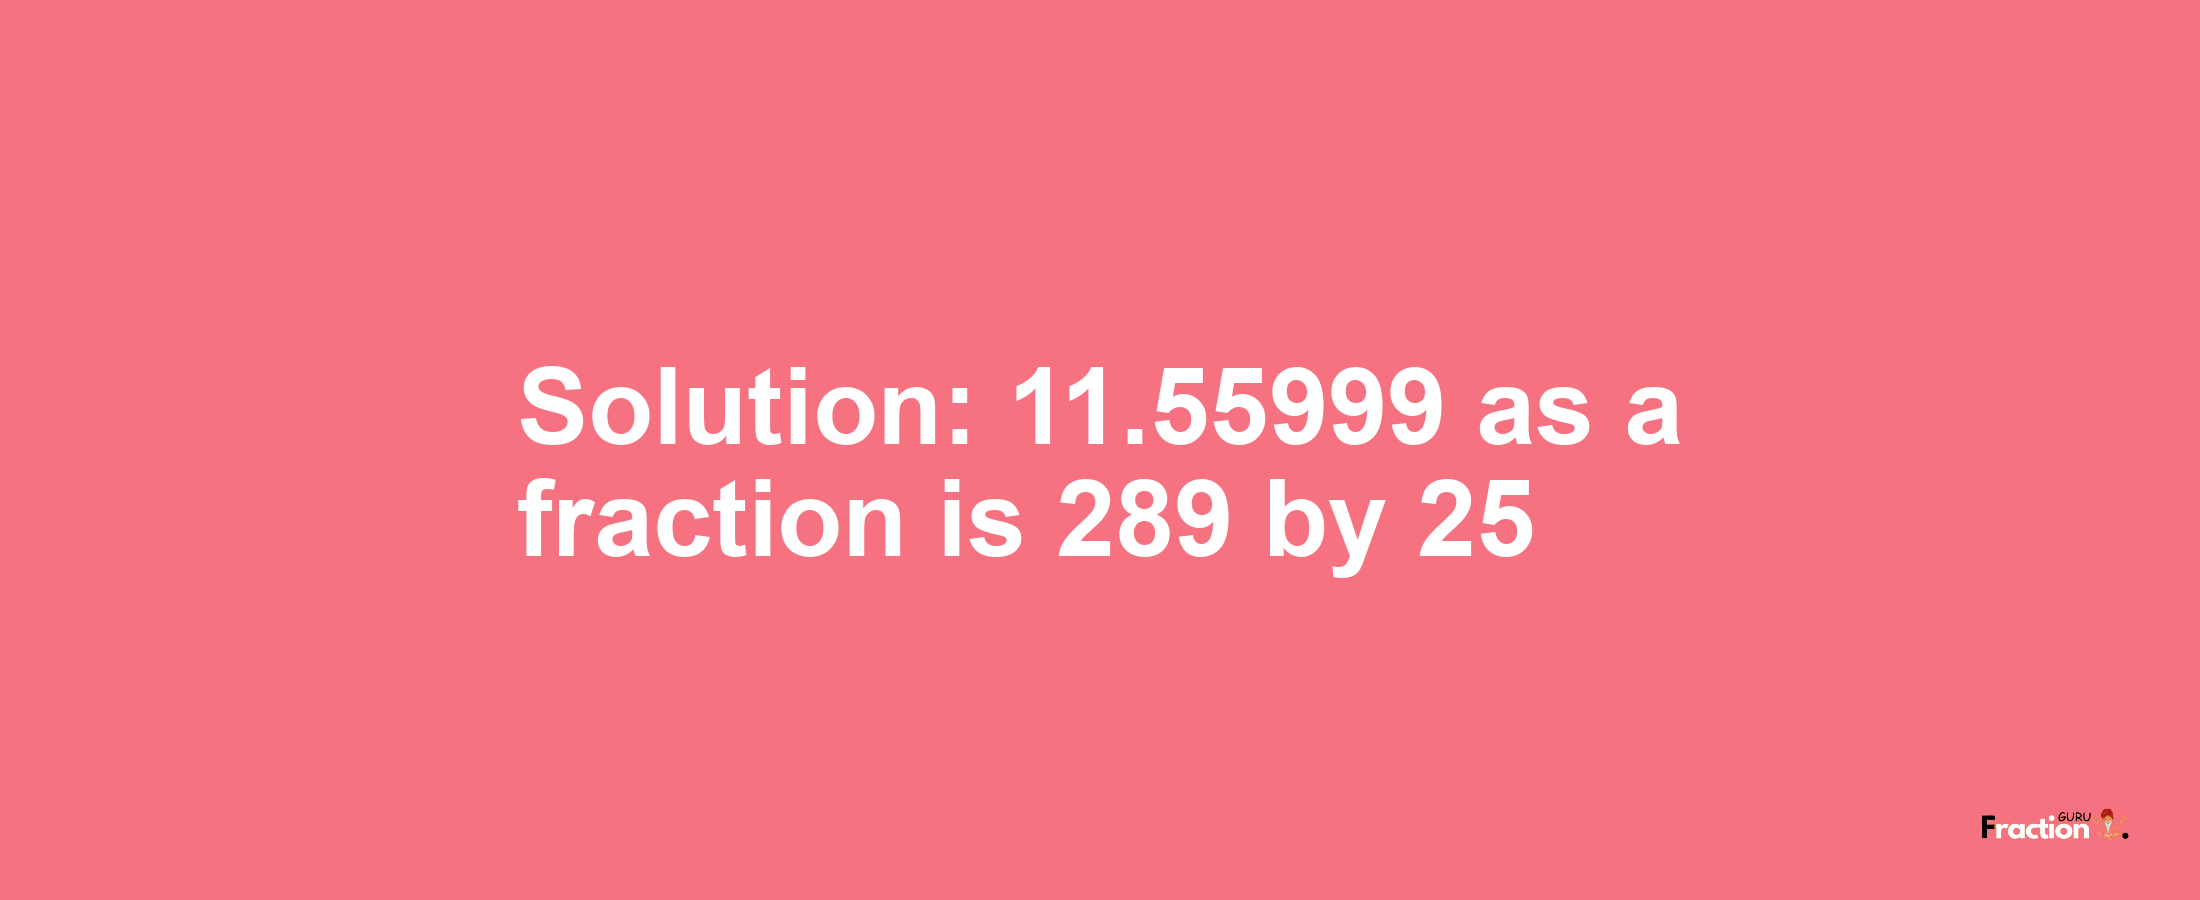 Solution:11.55999 as a fraction is 289/25